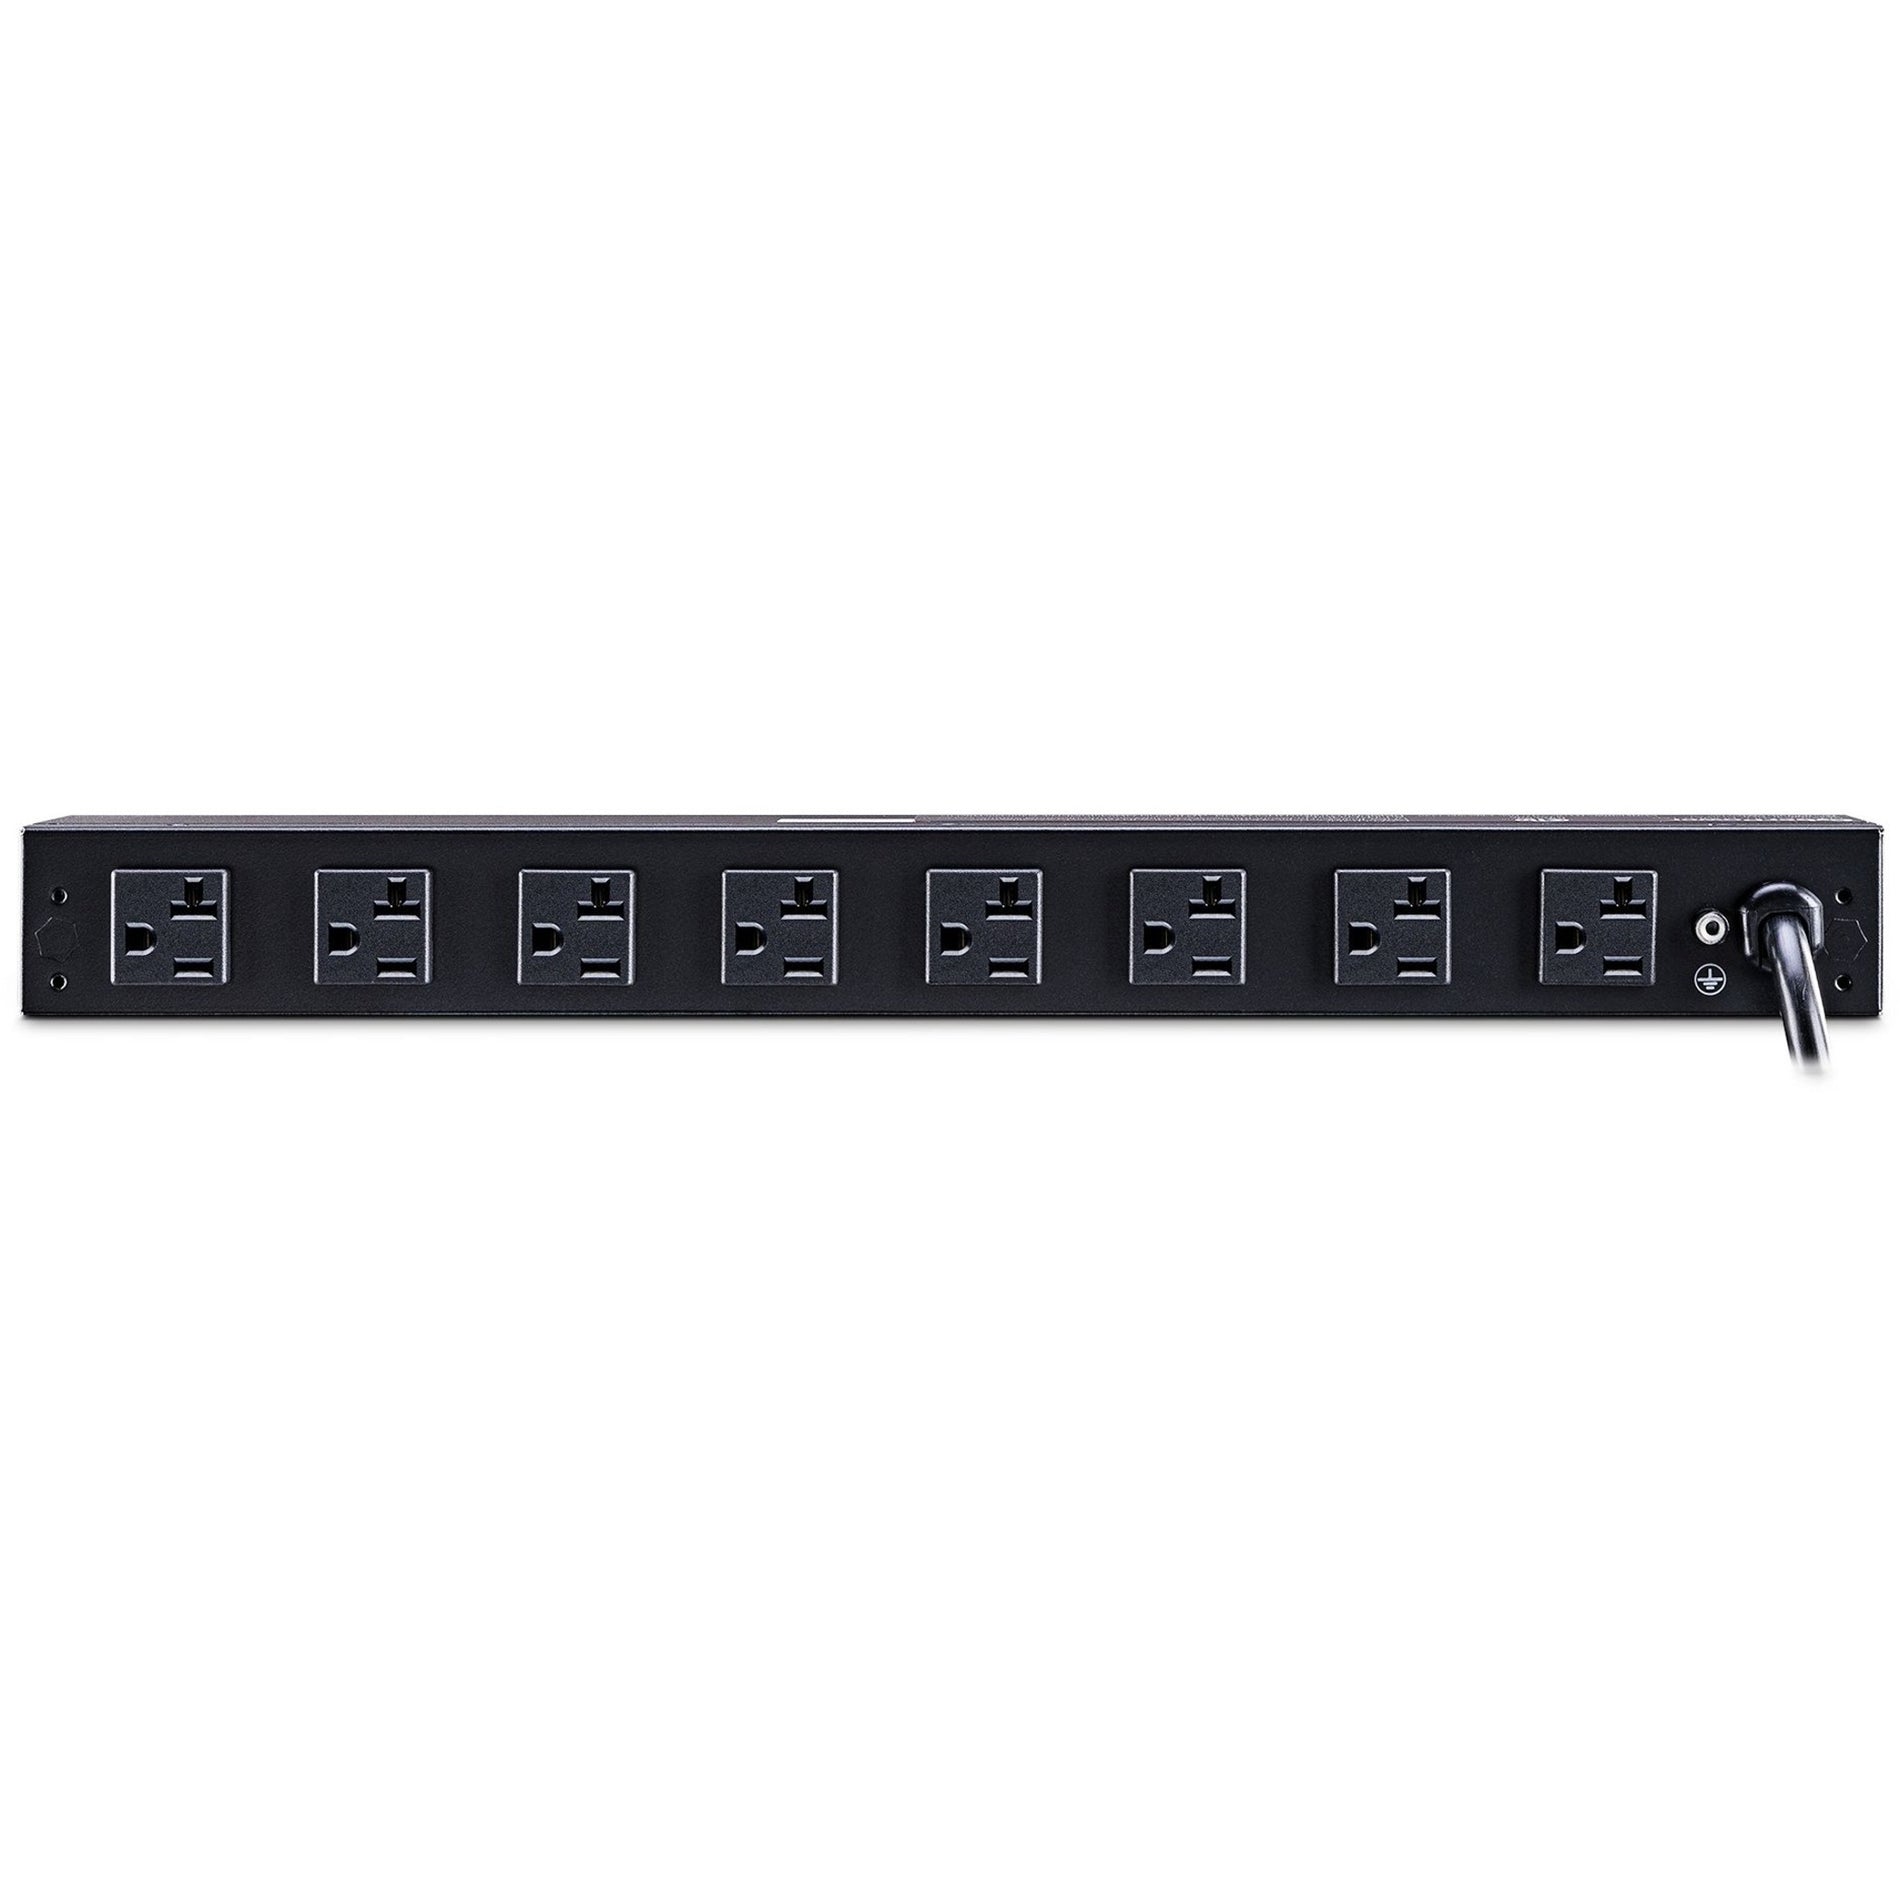 CyberPower PDU20M2F8R Metered PDU, 10-Outlets, 20A, 120V AC, Rack-mountable